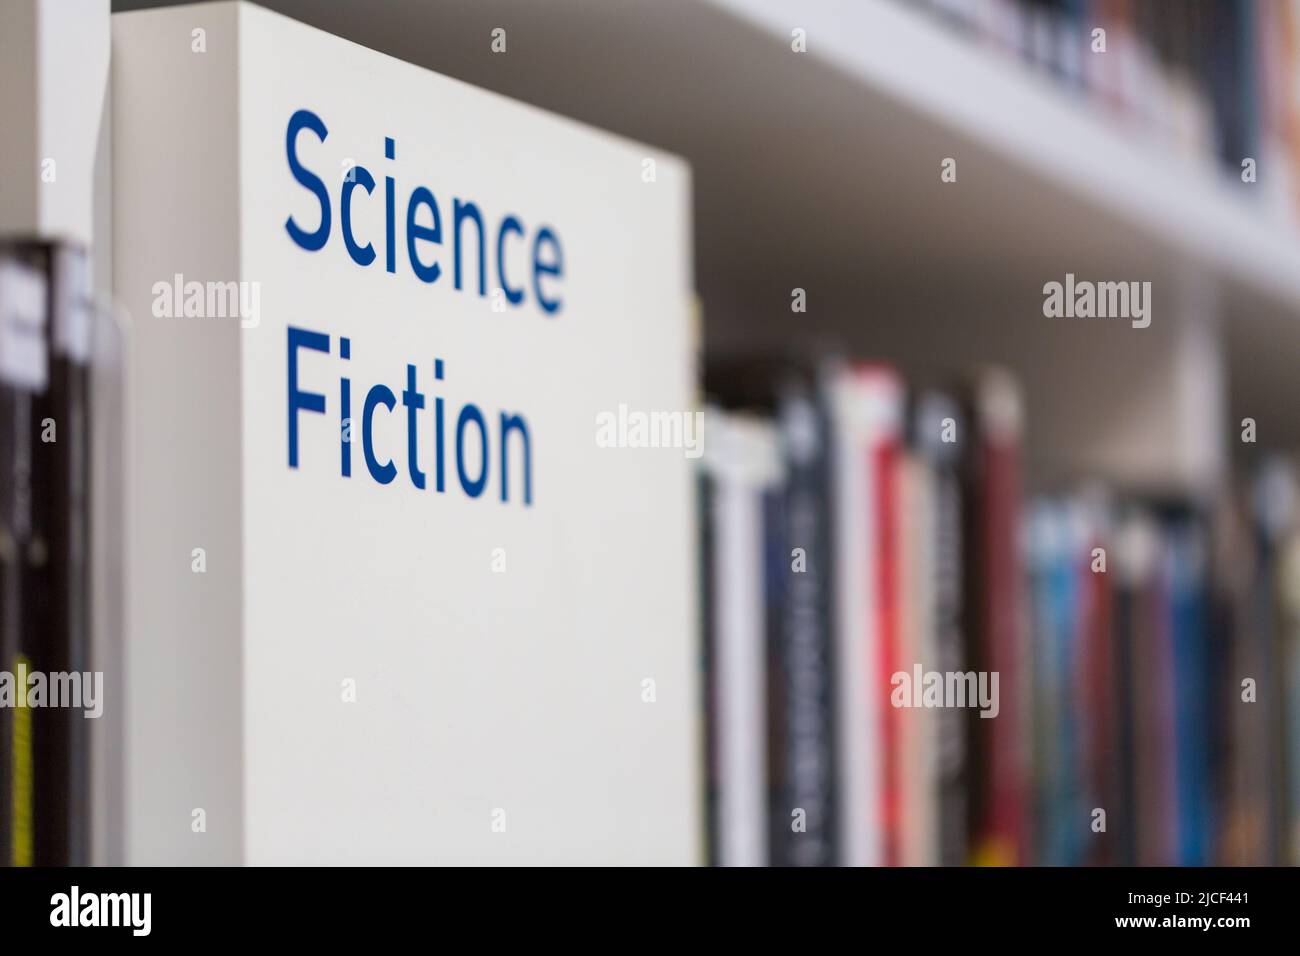 Writing 'Sciene Fiction' in a bookshelf  in a public library. Symbol for futuristic literature and the science fiction genre. Stock Photo